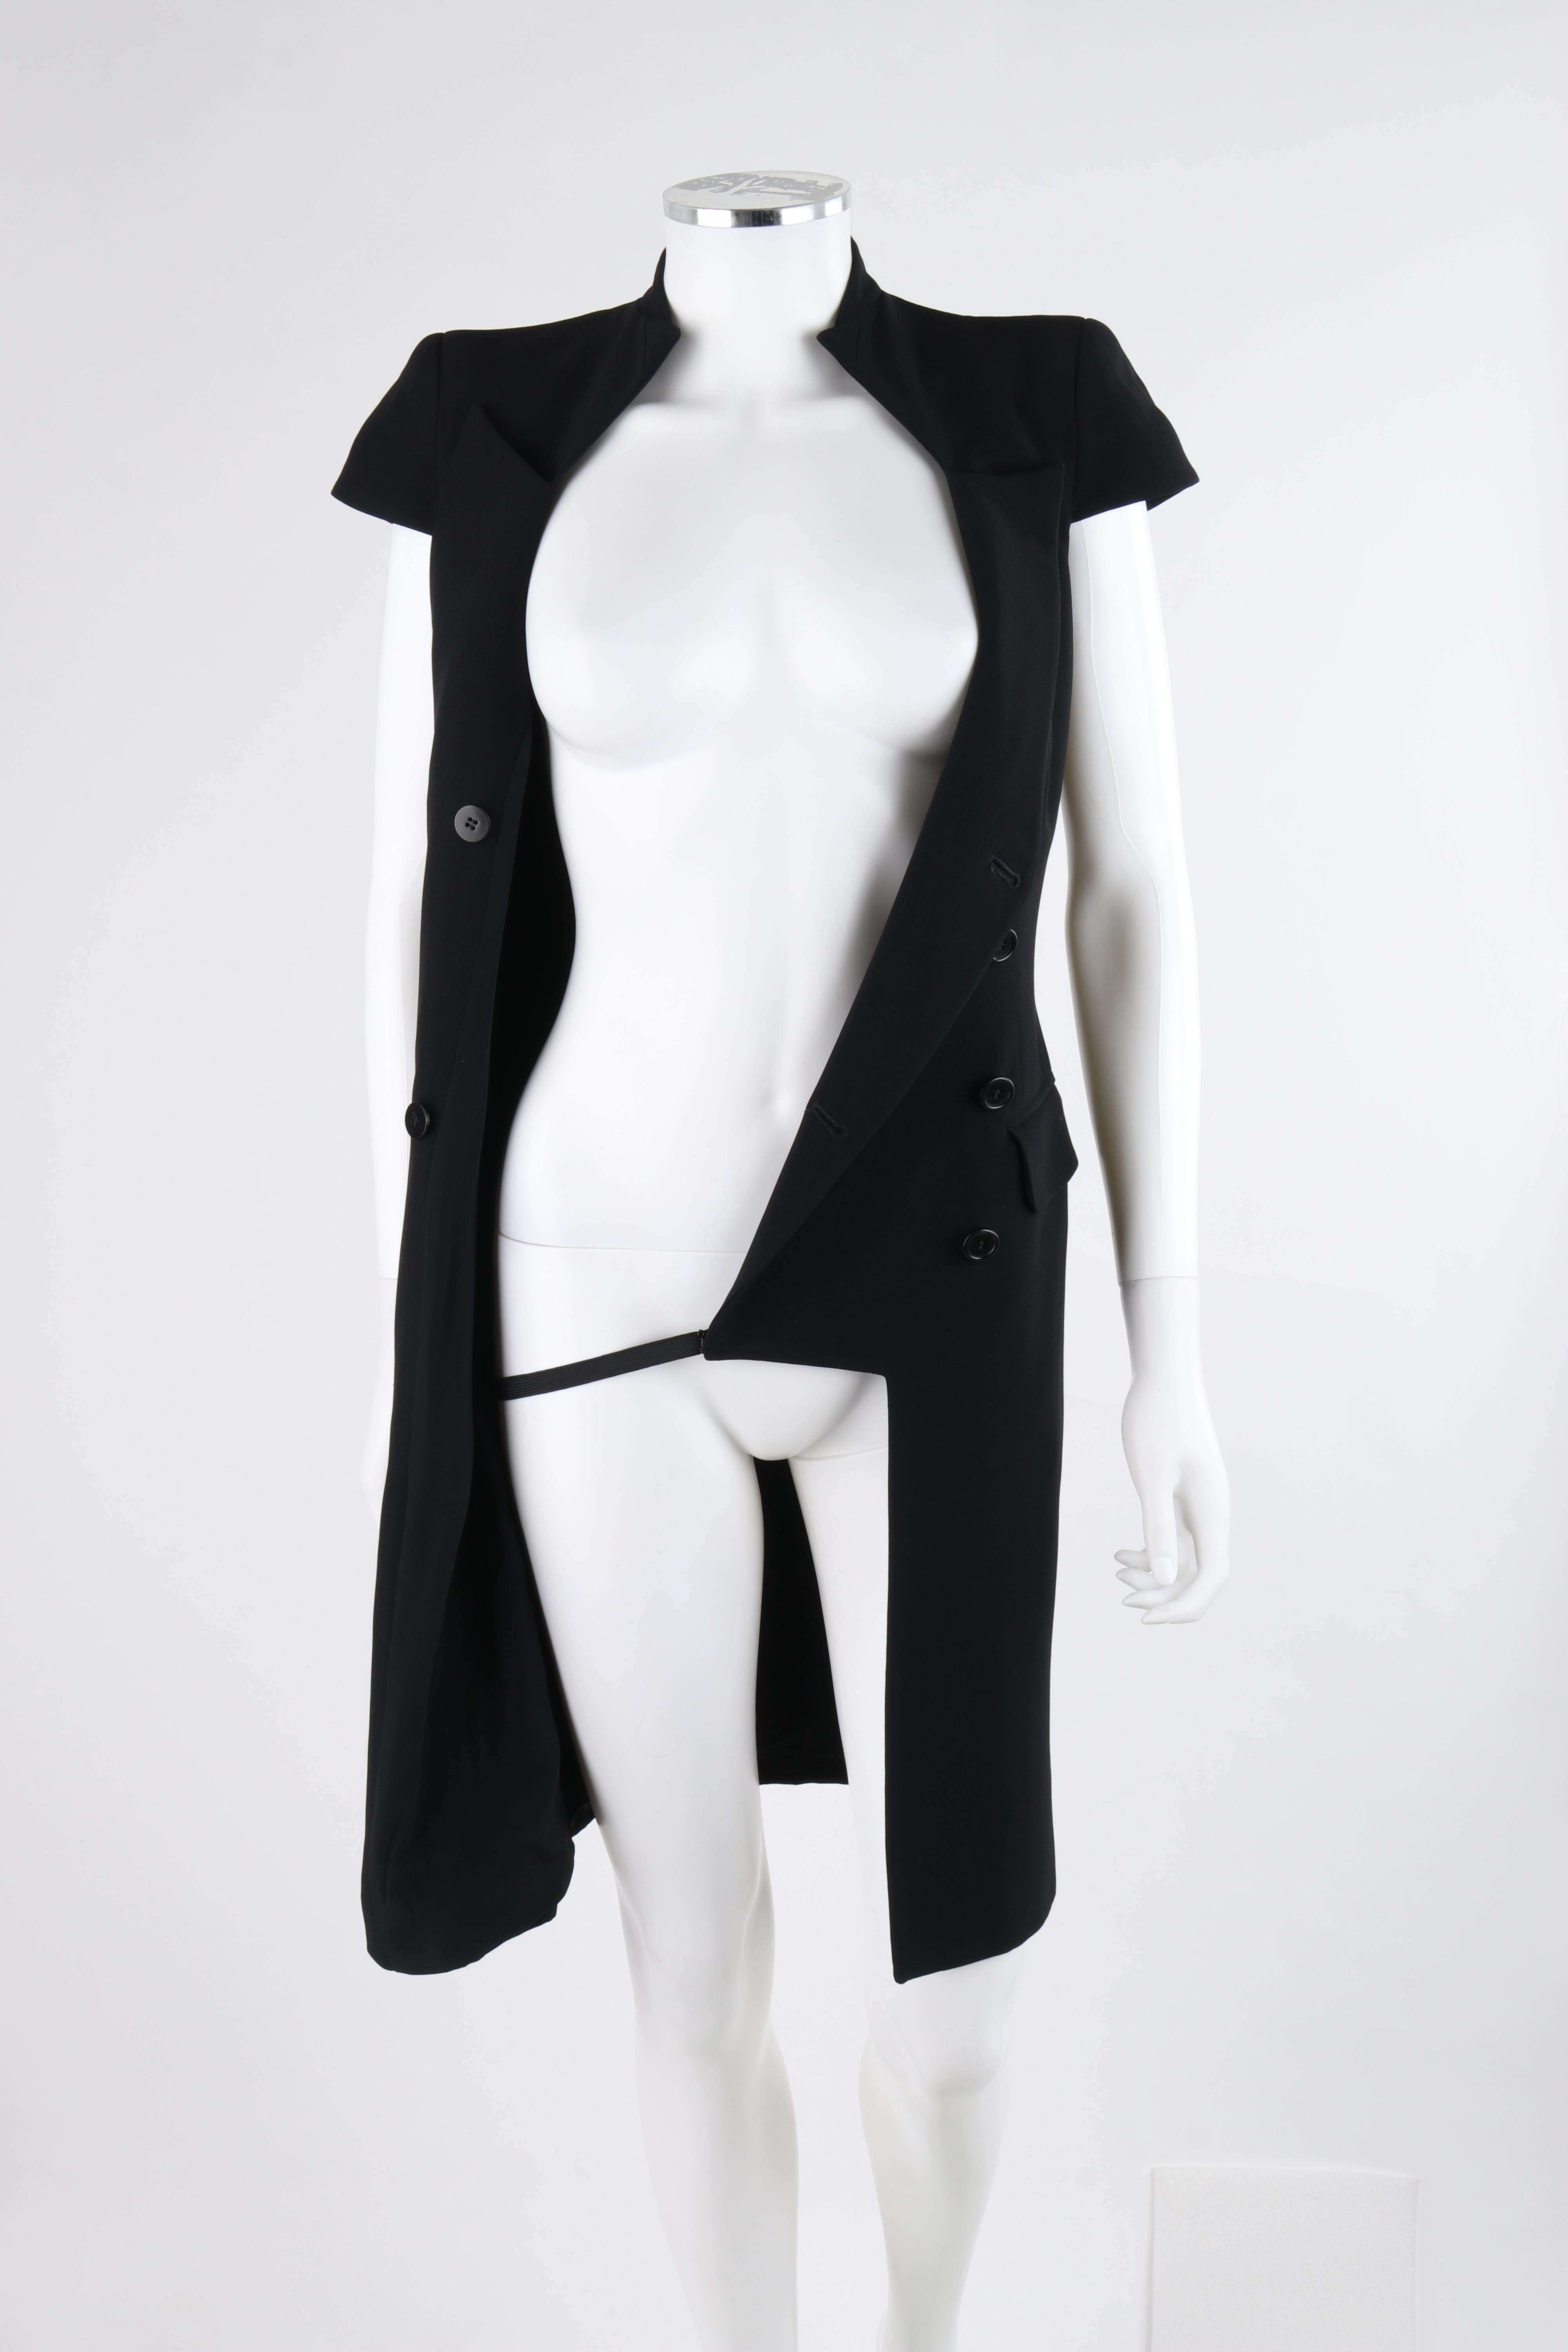 ALEXANDER McQUEEN c.2012 Black Double Breasted Button Up Collar Cocktail Dress For Sale 4